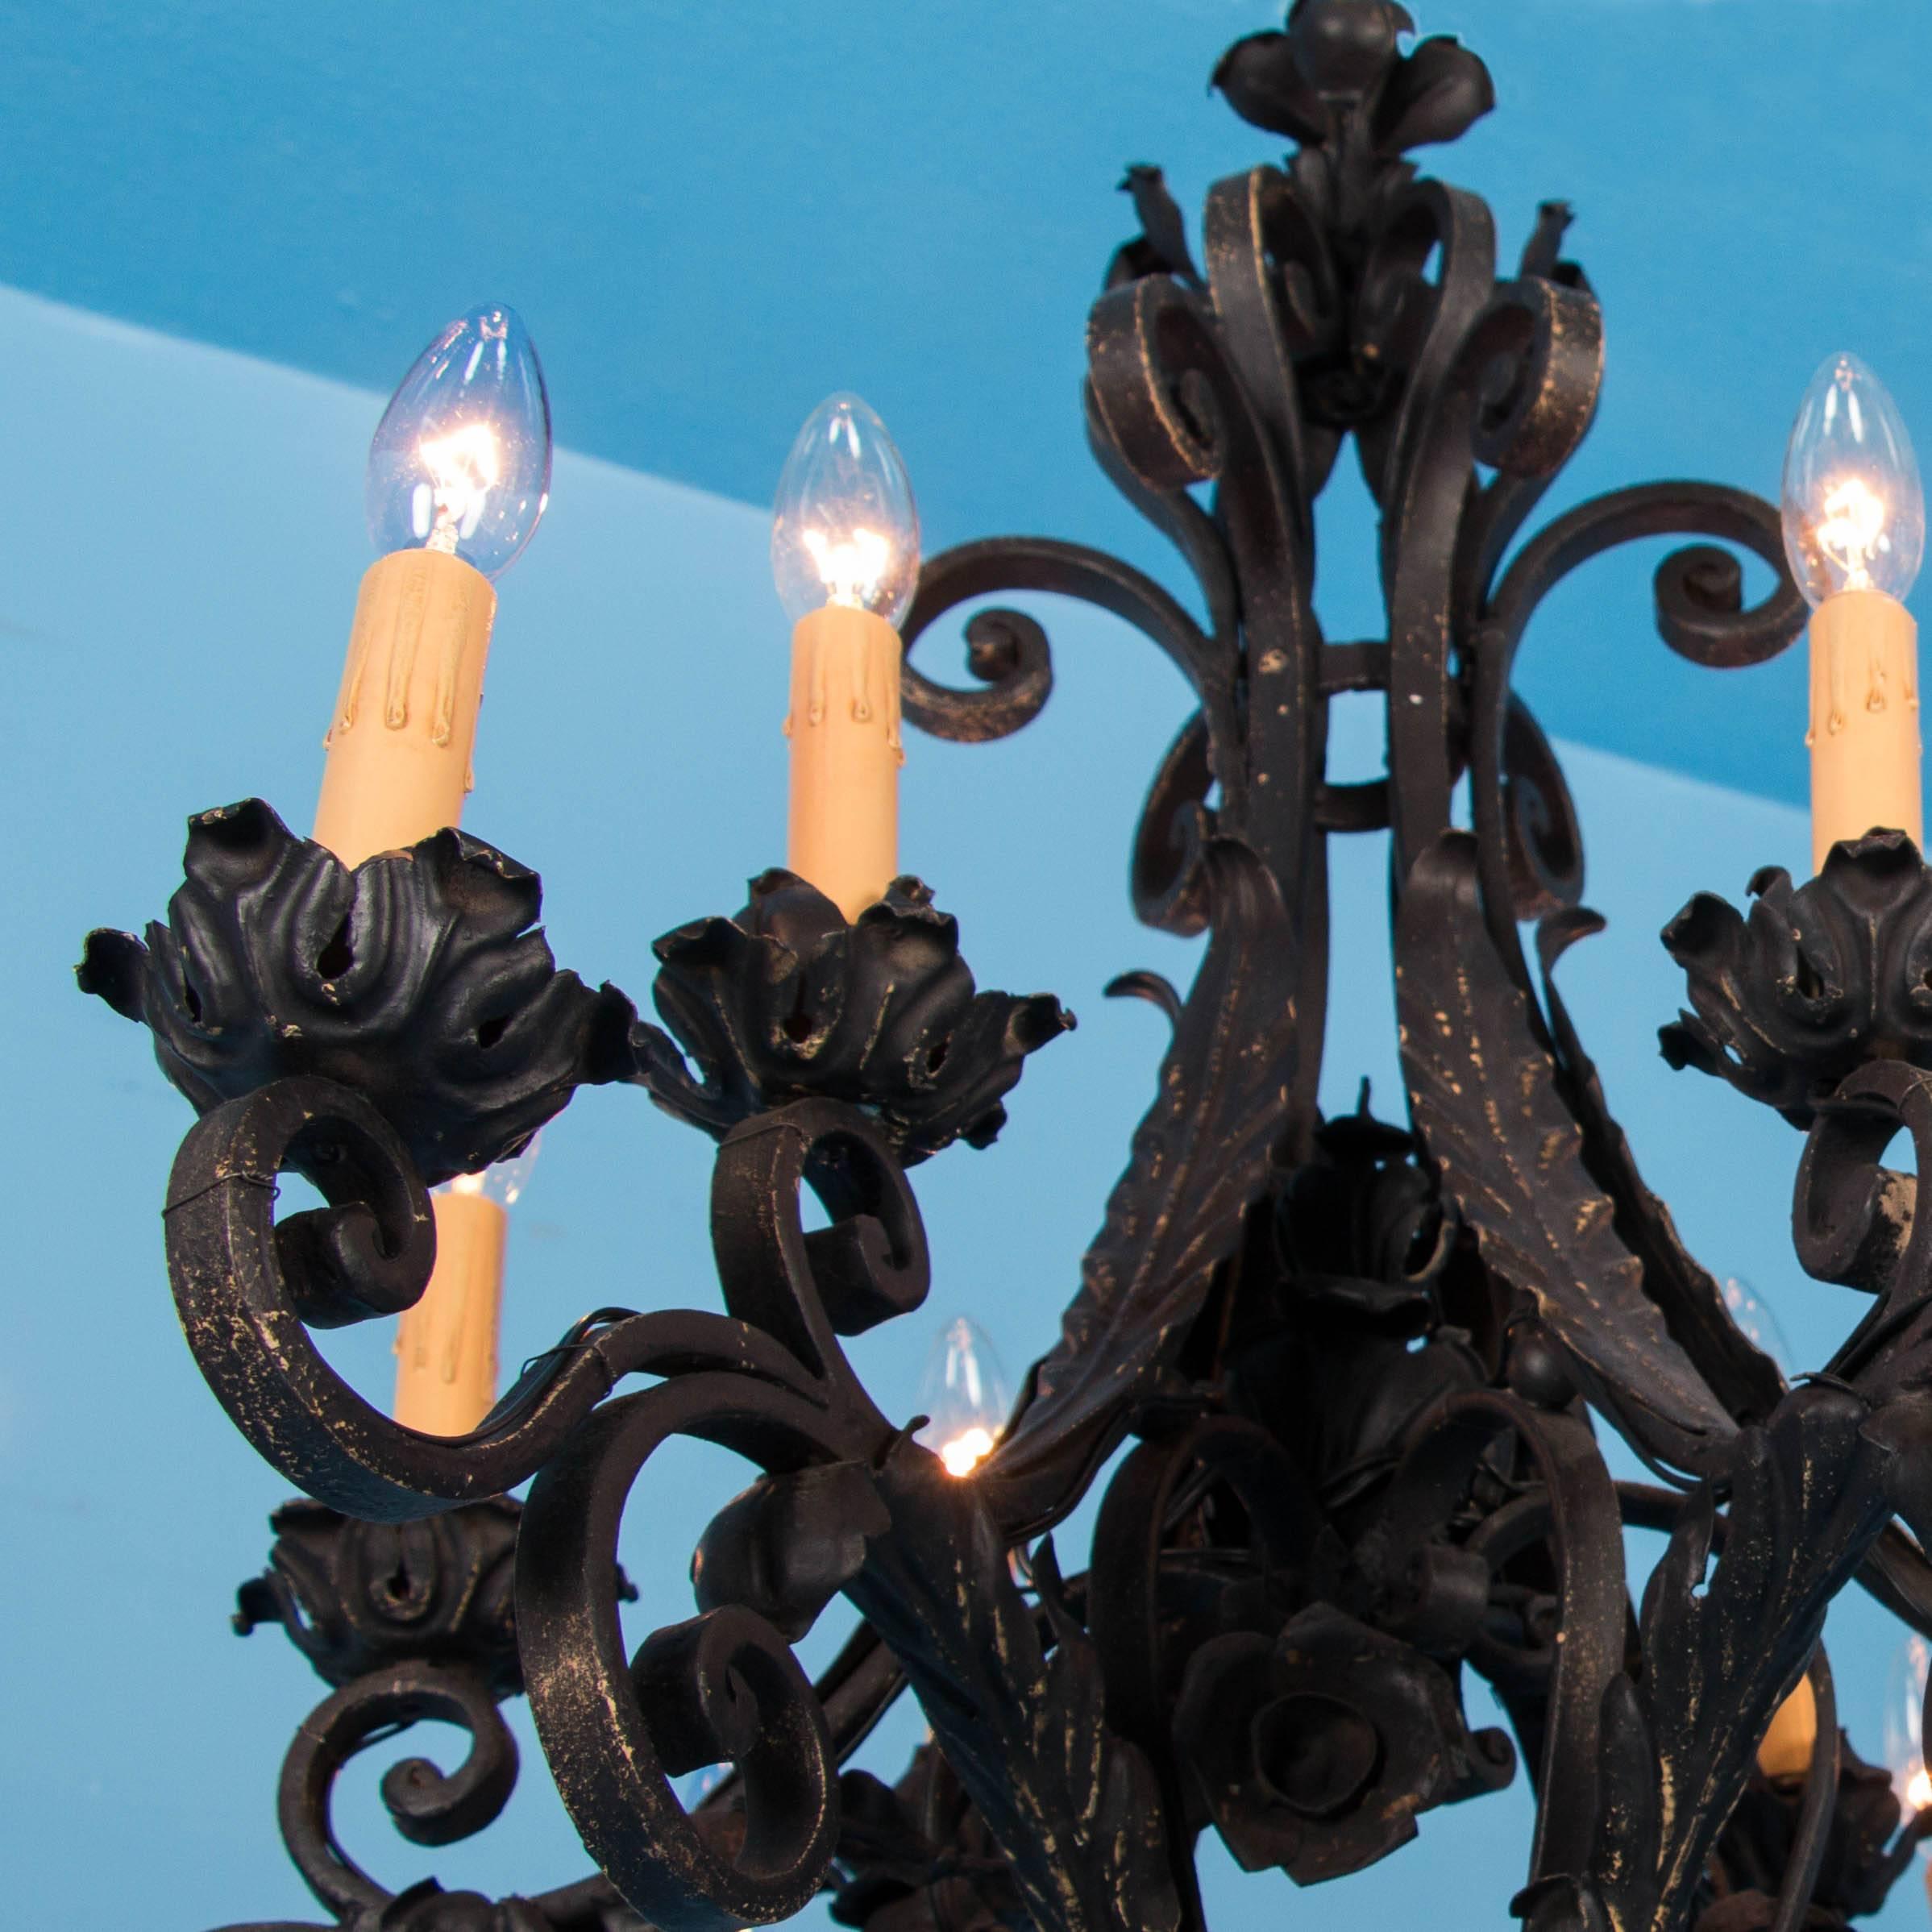 antique wrought iron chandeliers for sale